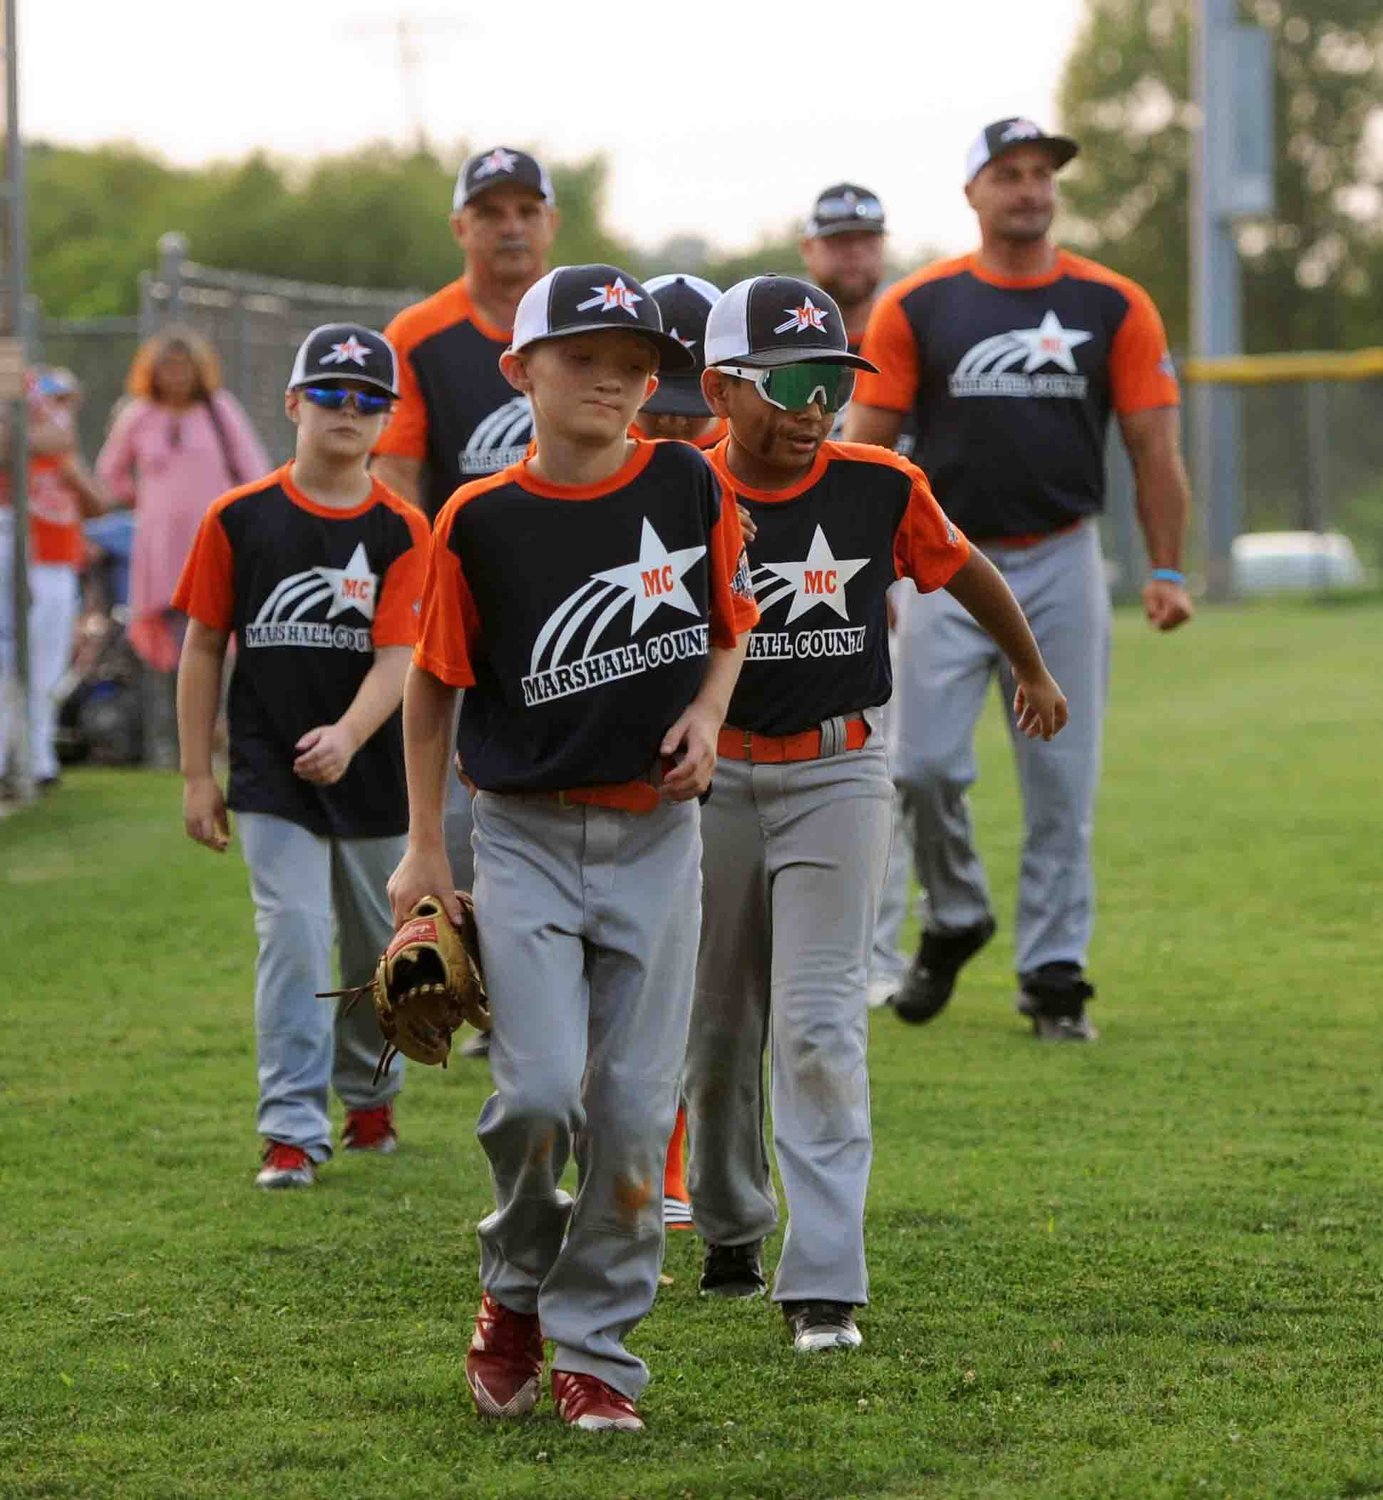 The 9-Year-Old Marshall County team makes its way onto the field for the opening ceremony after playing their first game in the tournament.